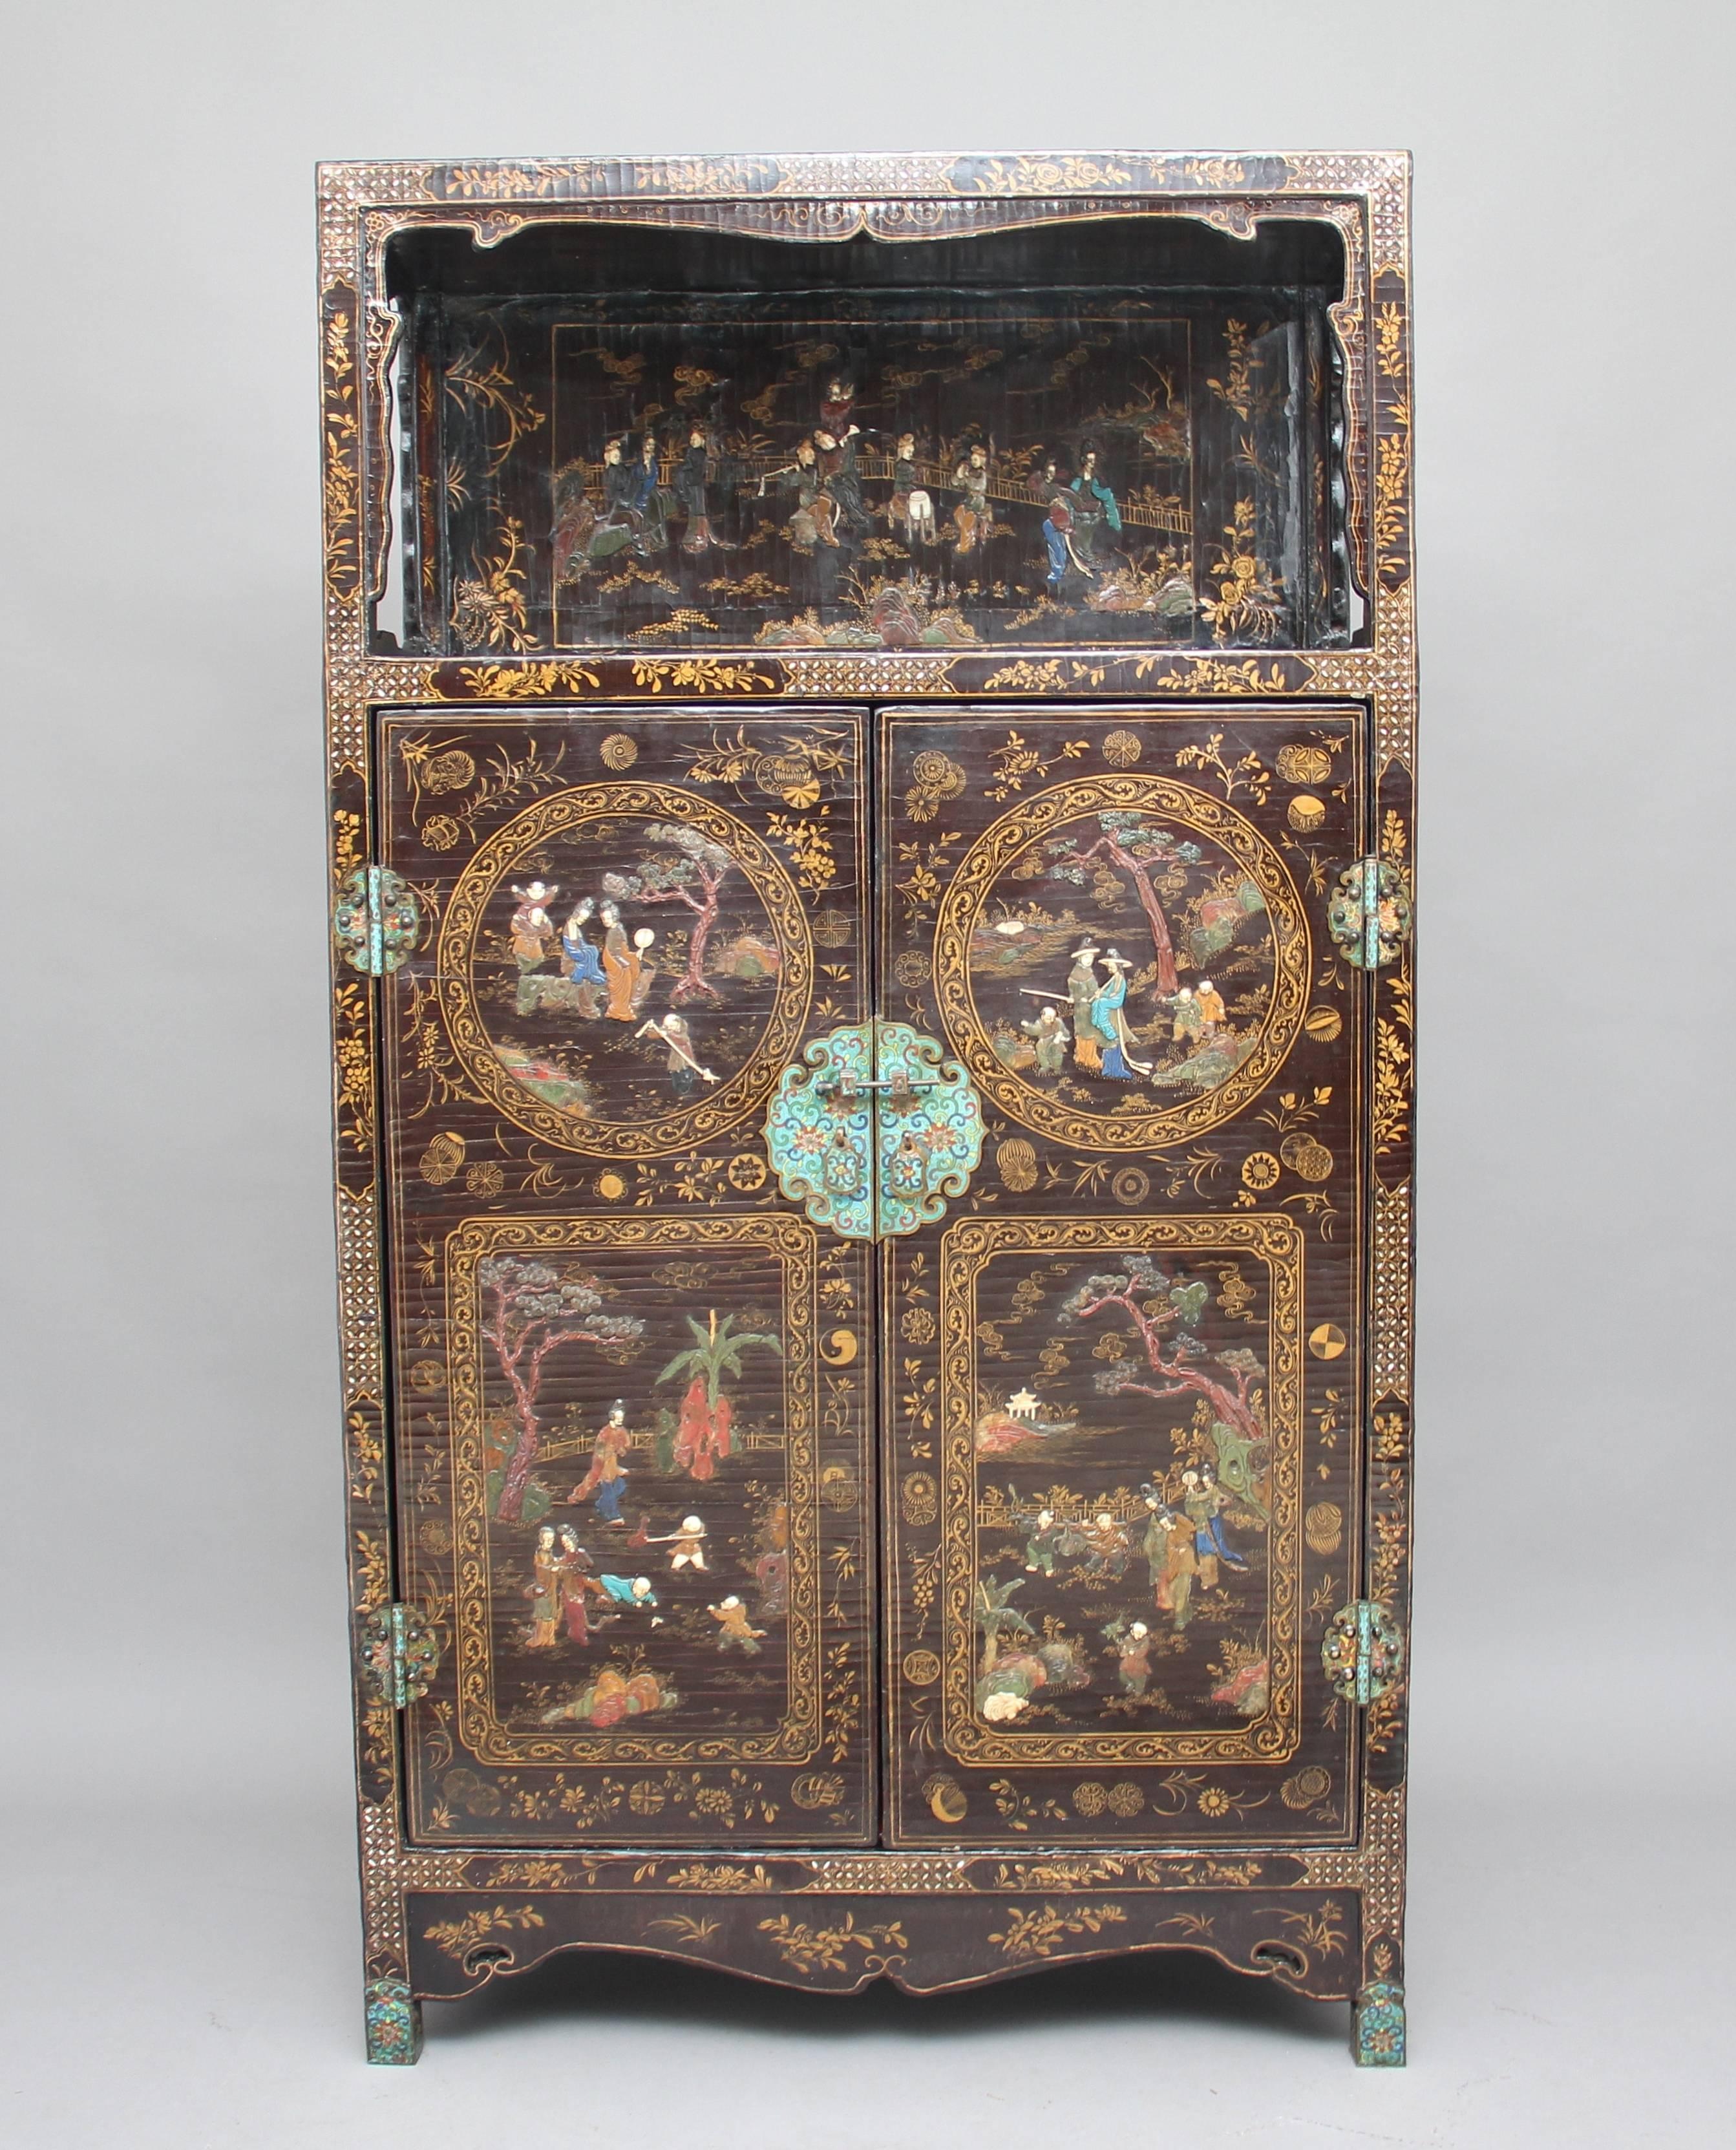 A superb quality early 19th century Chinese black lacquered hardstone inlaid cabinet in fantastic condition, profusely decorated all over this really is a magnificent piece, having an open top with a shaped frieze, the back having floral gilt